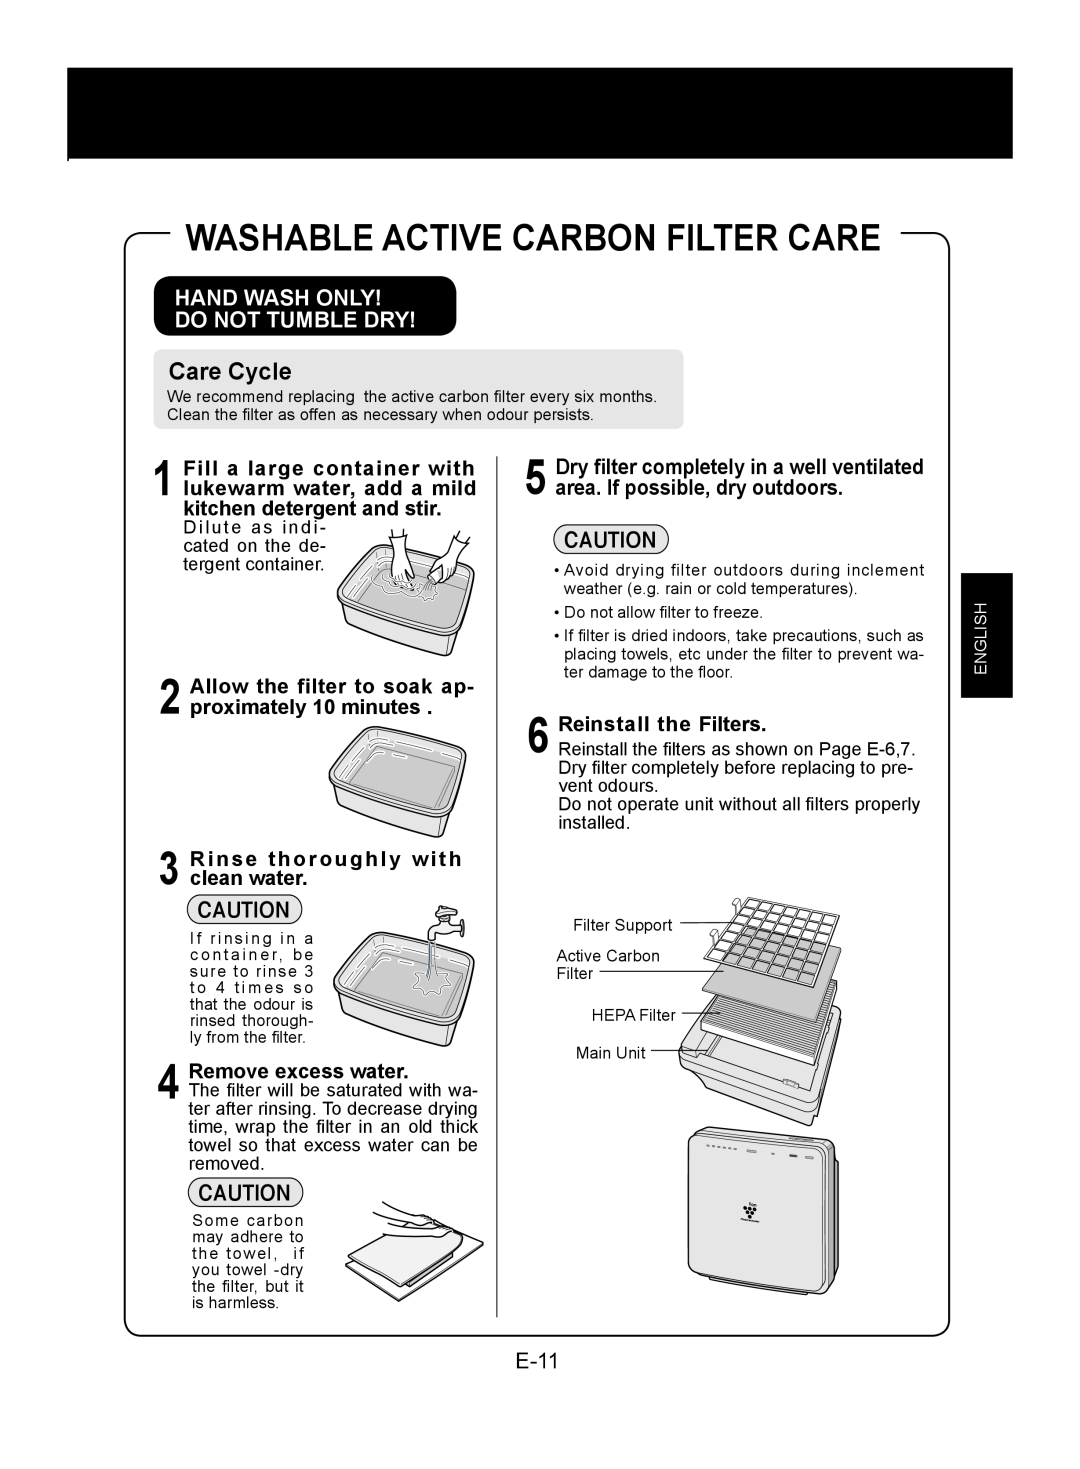 Sharp FU-W28E Washable Active Carbon Filter Care, Care Cycle, E-11, Rinse thoroughly with clean water, Remove excess water 